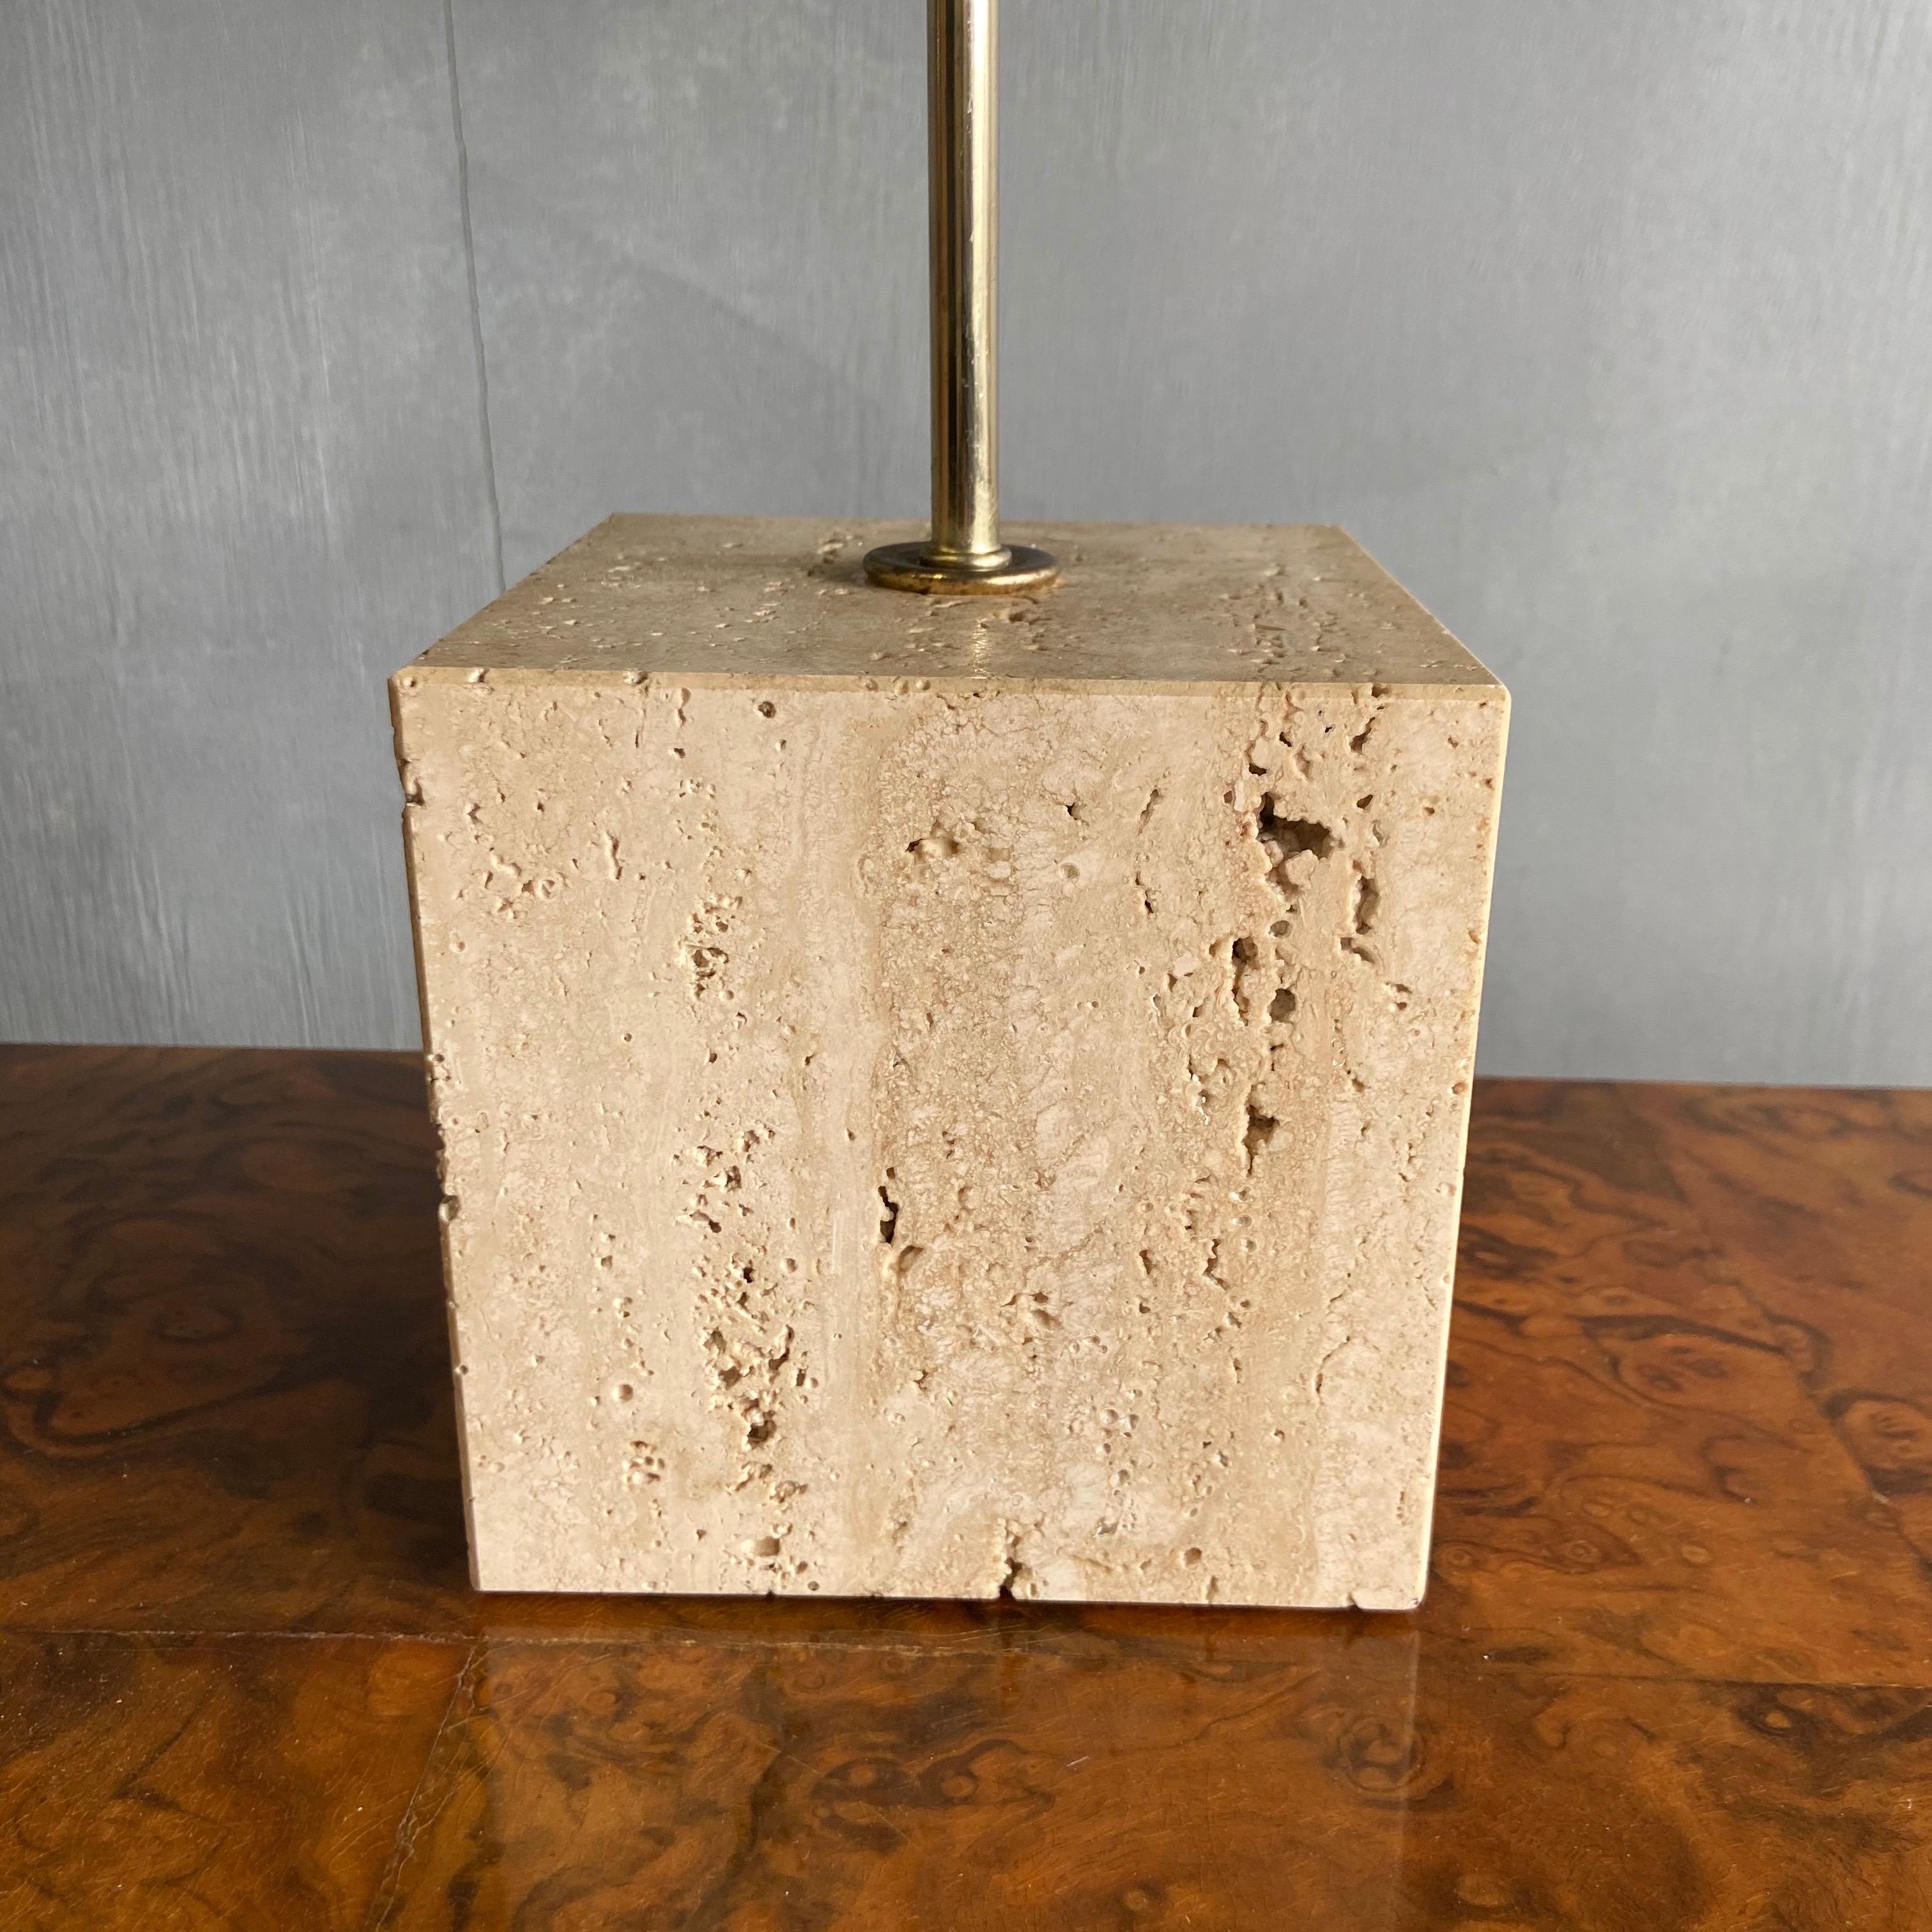 For your consideration is this wonderful midcentury Harvey Guzzini polished brass arched table or desk lamp mounted on a square travertine stone base. Showing natural warm patina free of dings to the shade or kinks to the arm. In excellent vintage